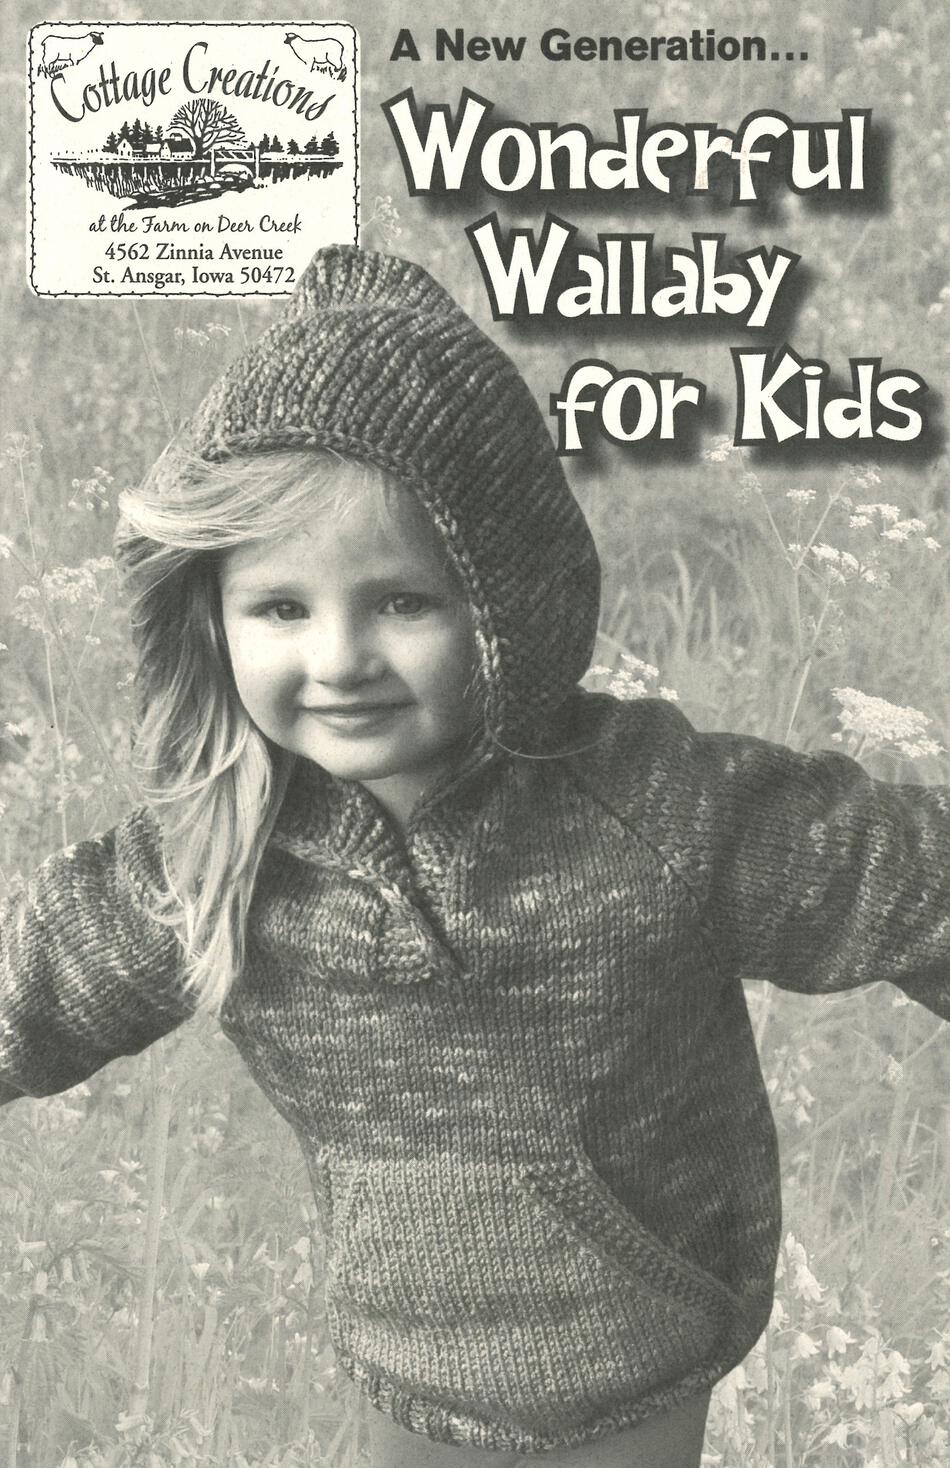 Knitting Books A New Generation Wonderful Wallaby for Kids